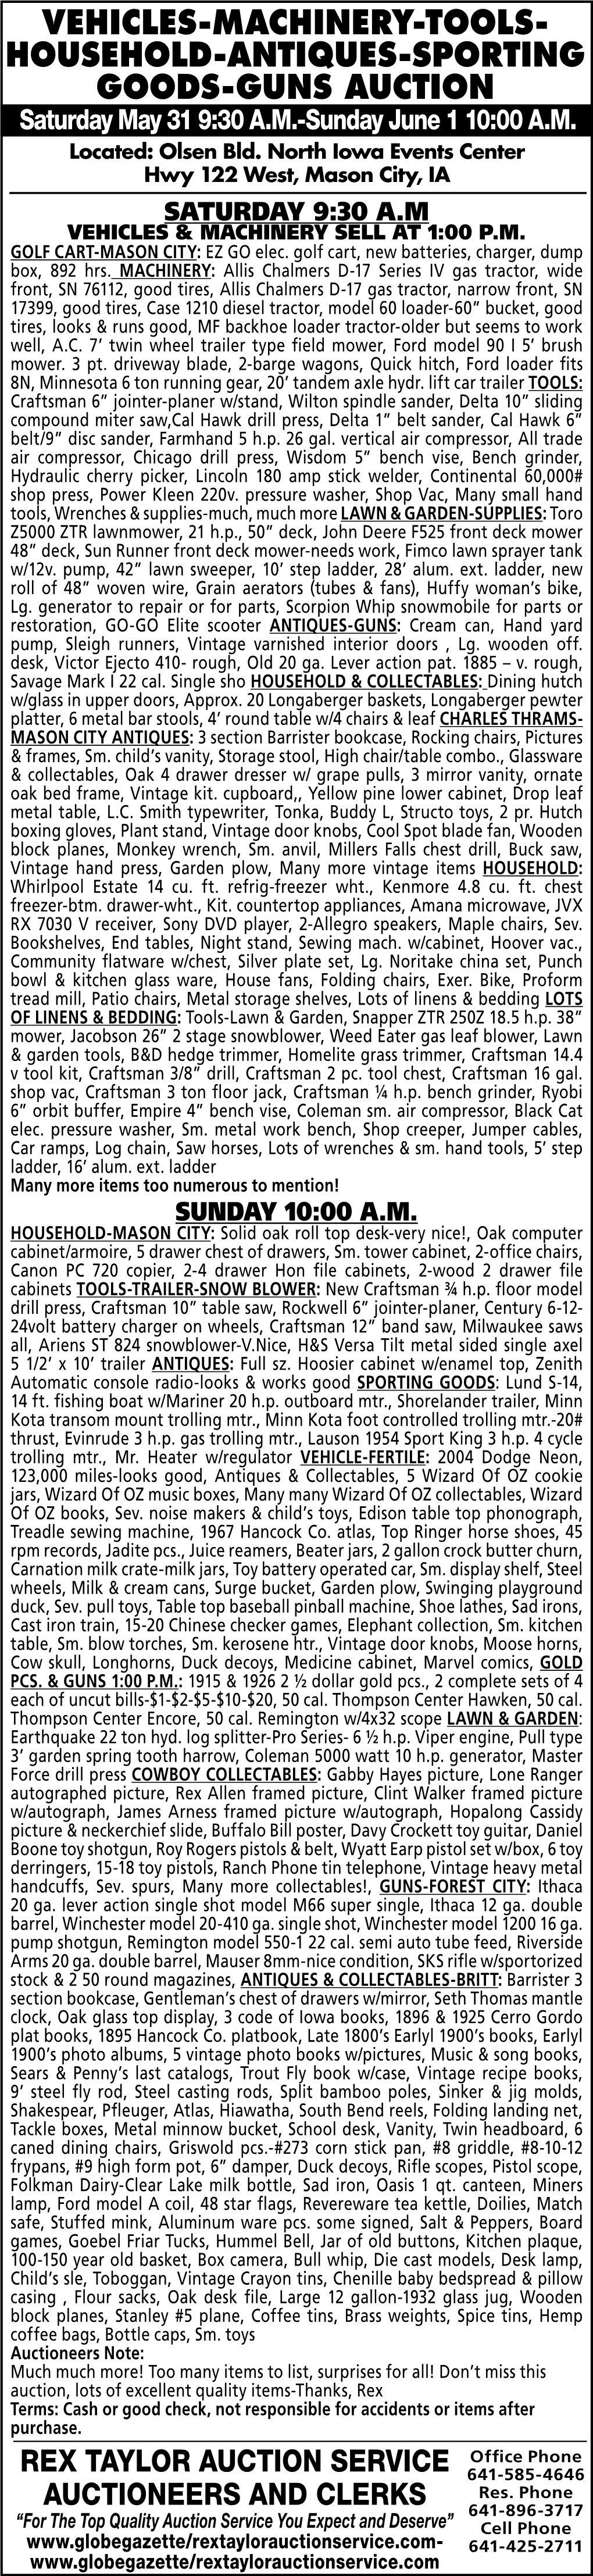 Household-Antiques-Sporting Goods-Guns Auction Saturday May 31 9:30 A.M.-Sunday June 1 10:00 A.M